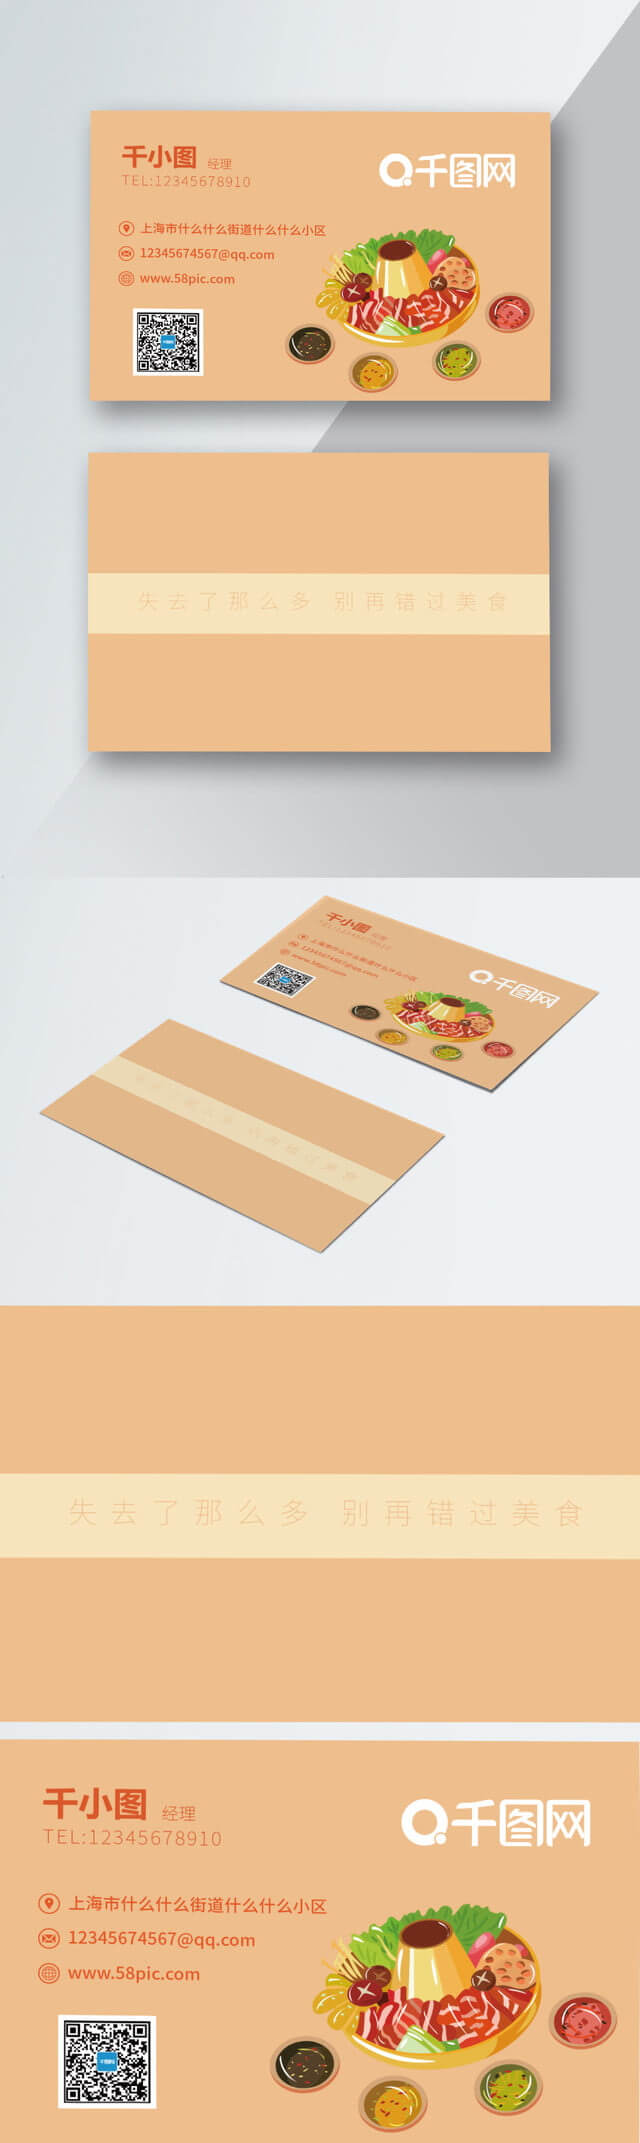 Business Card Free Download Business Card Fast Food Catering Regarding Food Business Cards Templates Free